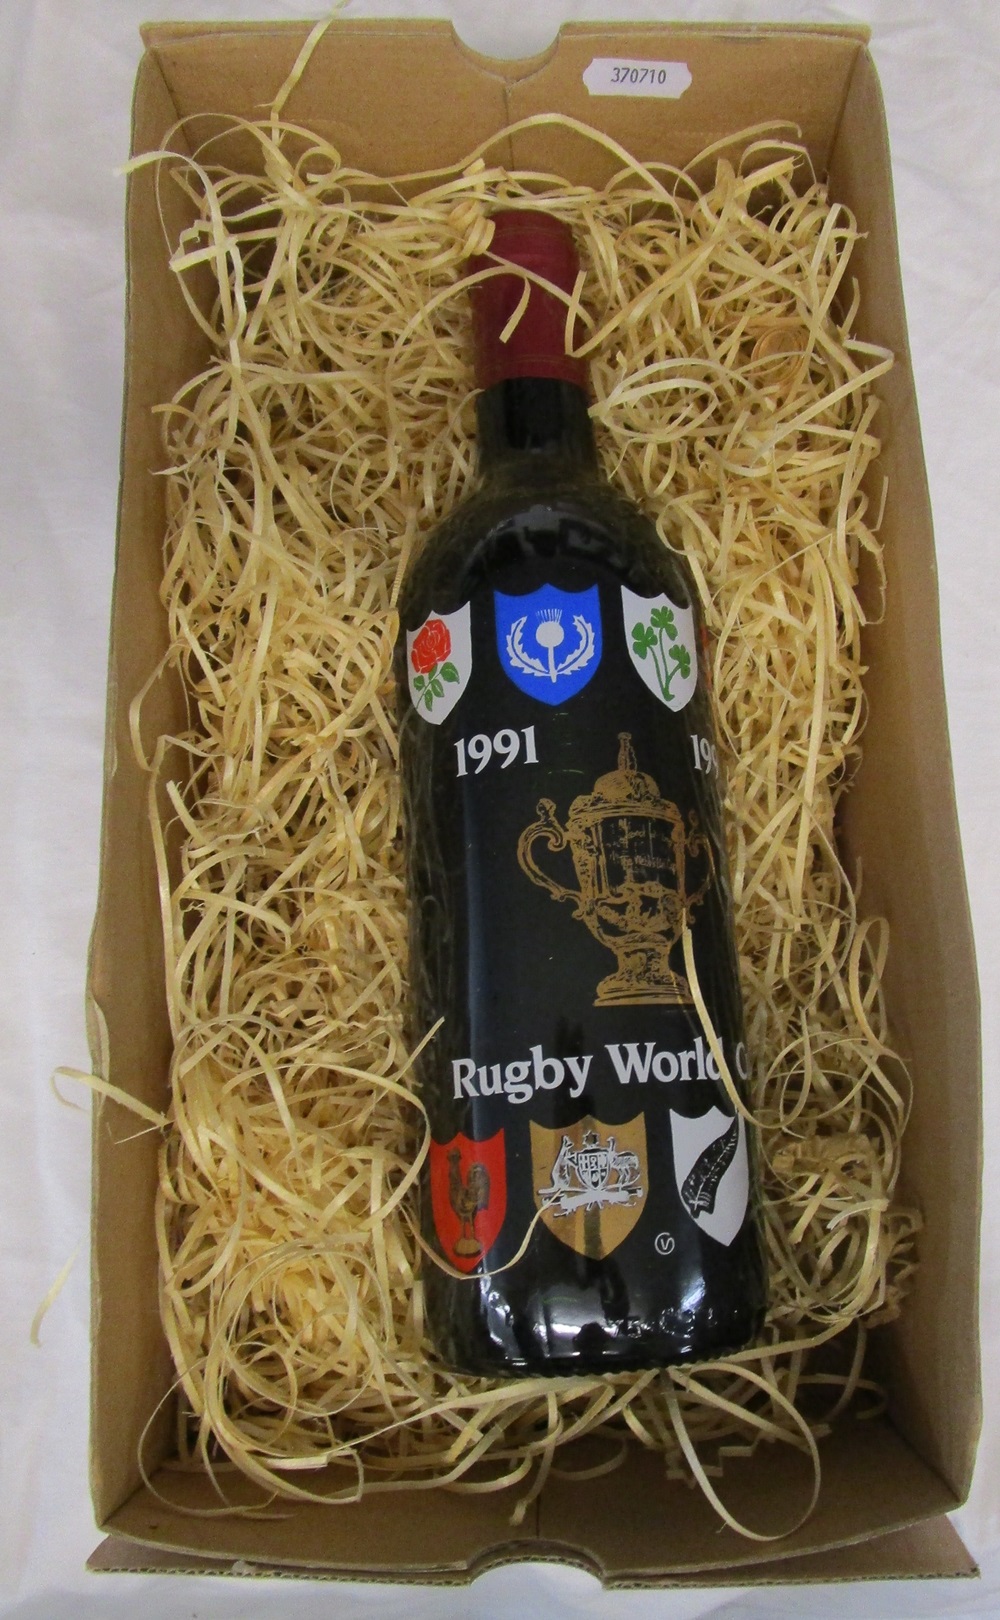 Rugby World Cup wine